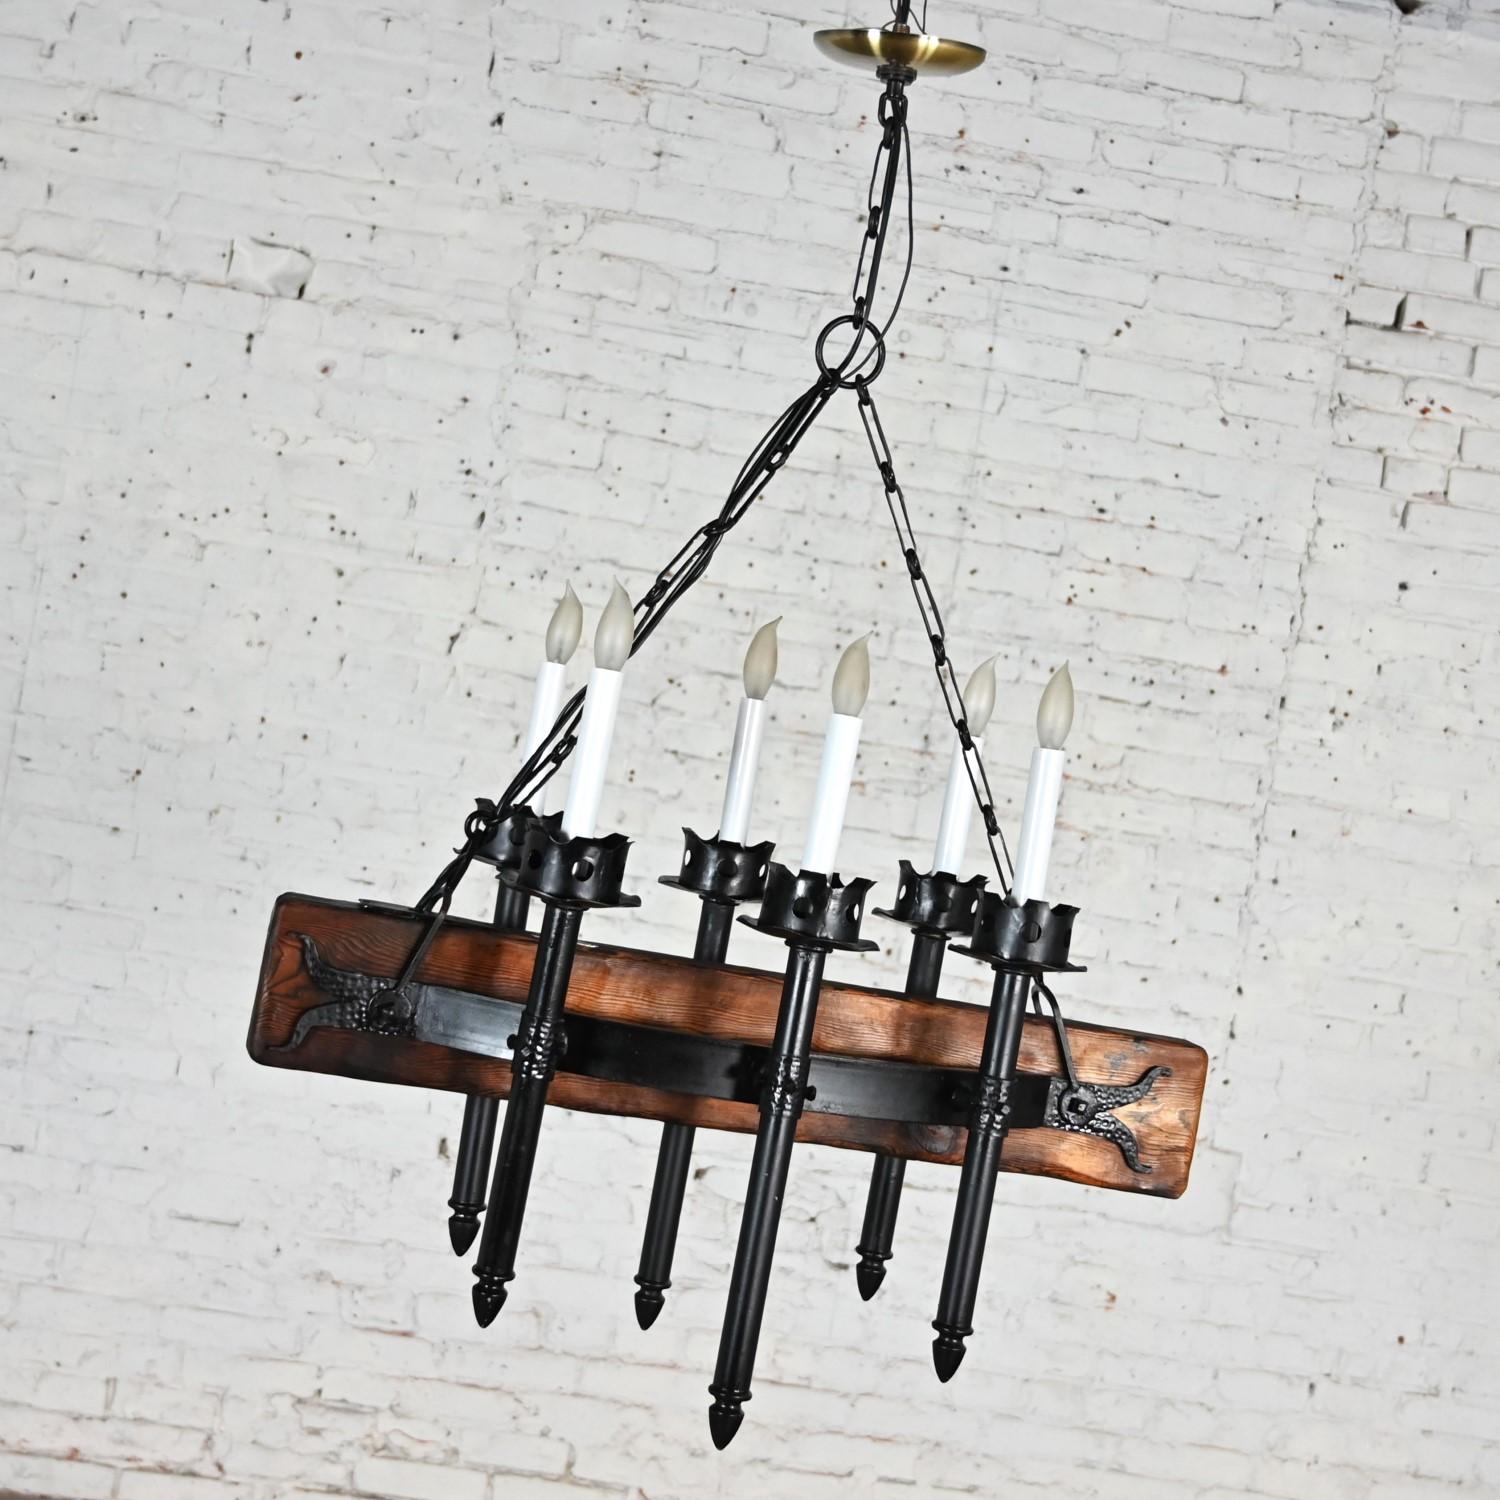 Medieval Gothic Spanish Revival Iron & Wood Beam Hanging Light Fixture Mexico For Sale 6